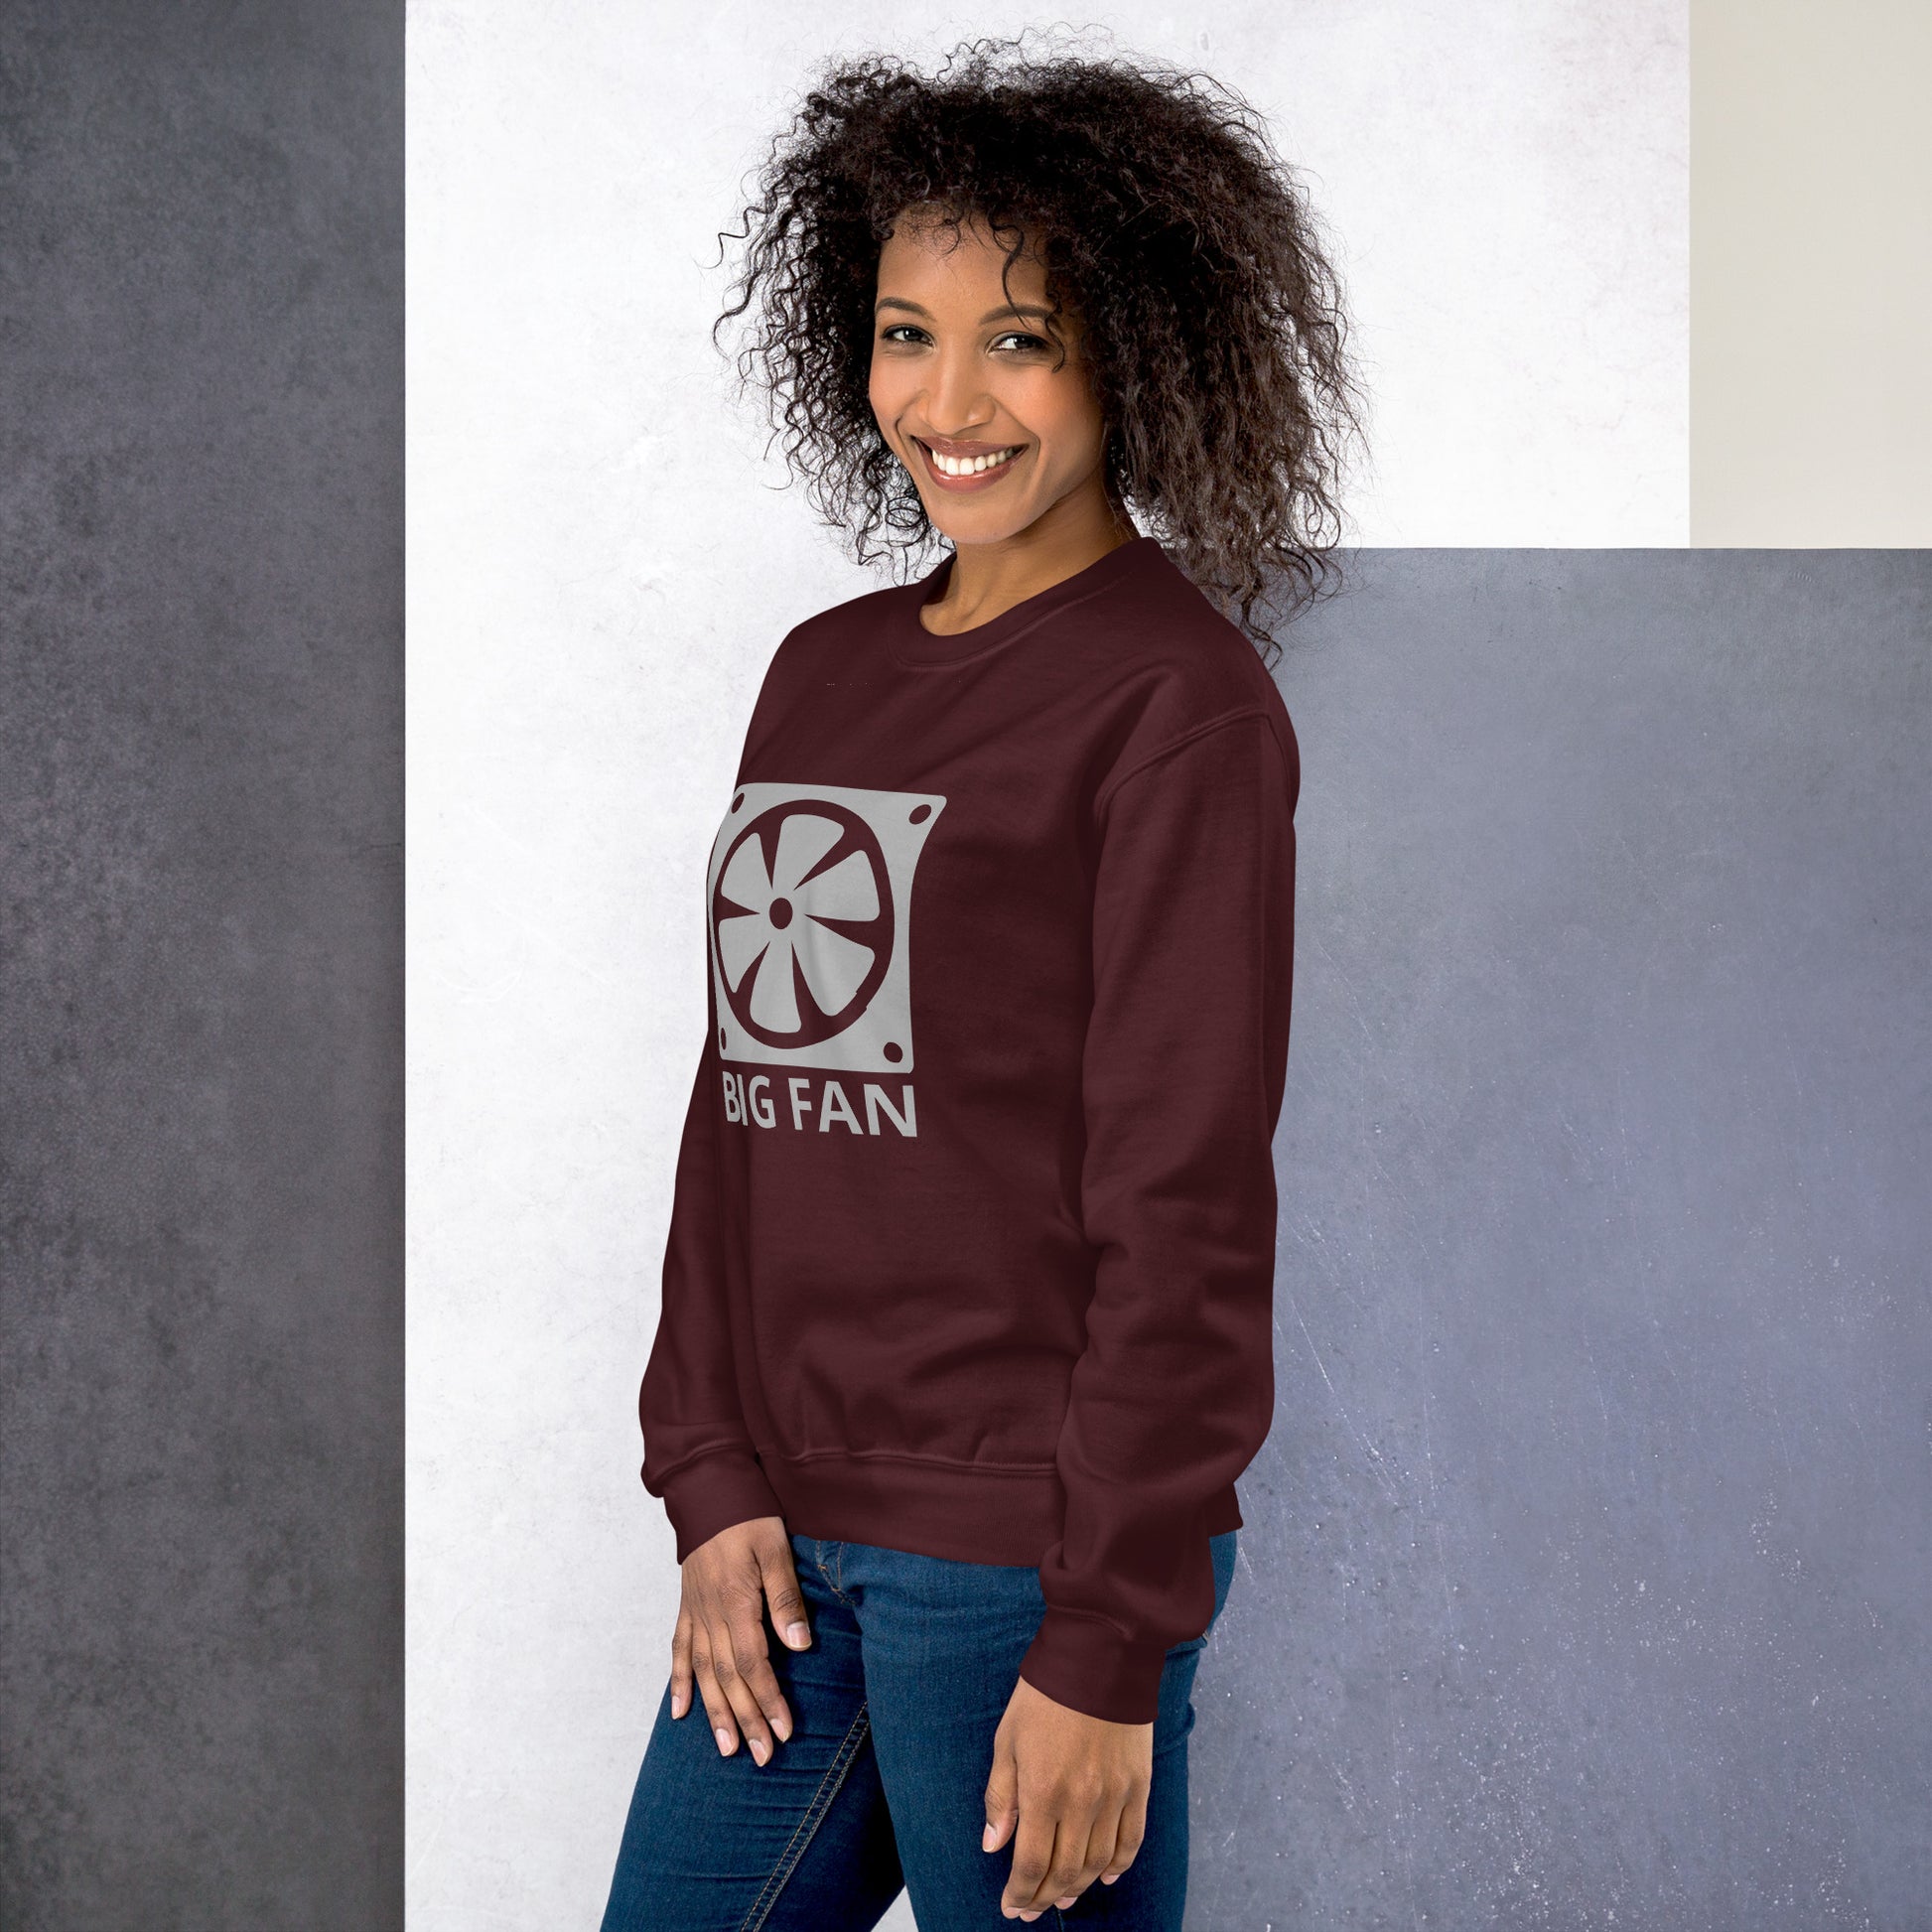 Women with maroon sweatshirt with image of a big computer fan and the text "BIG FAN"